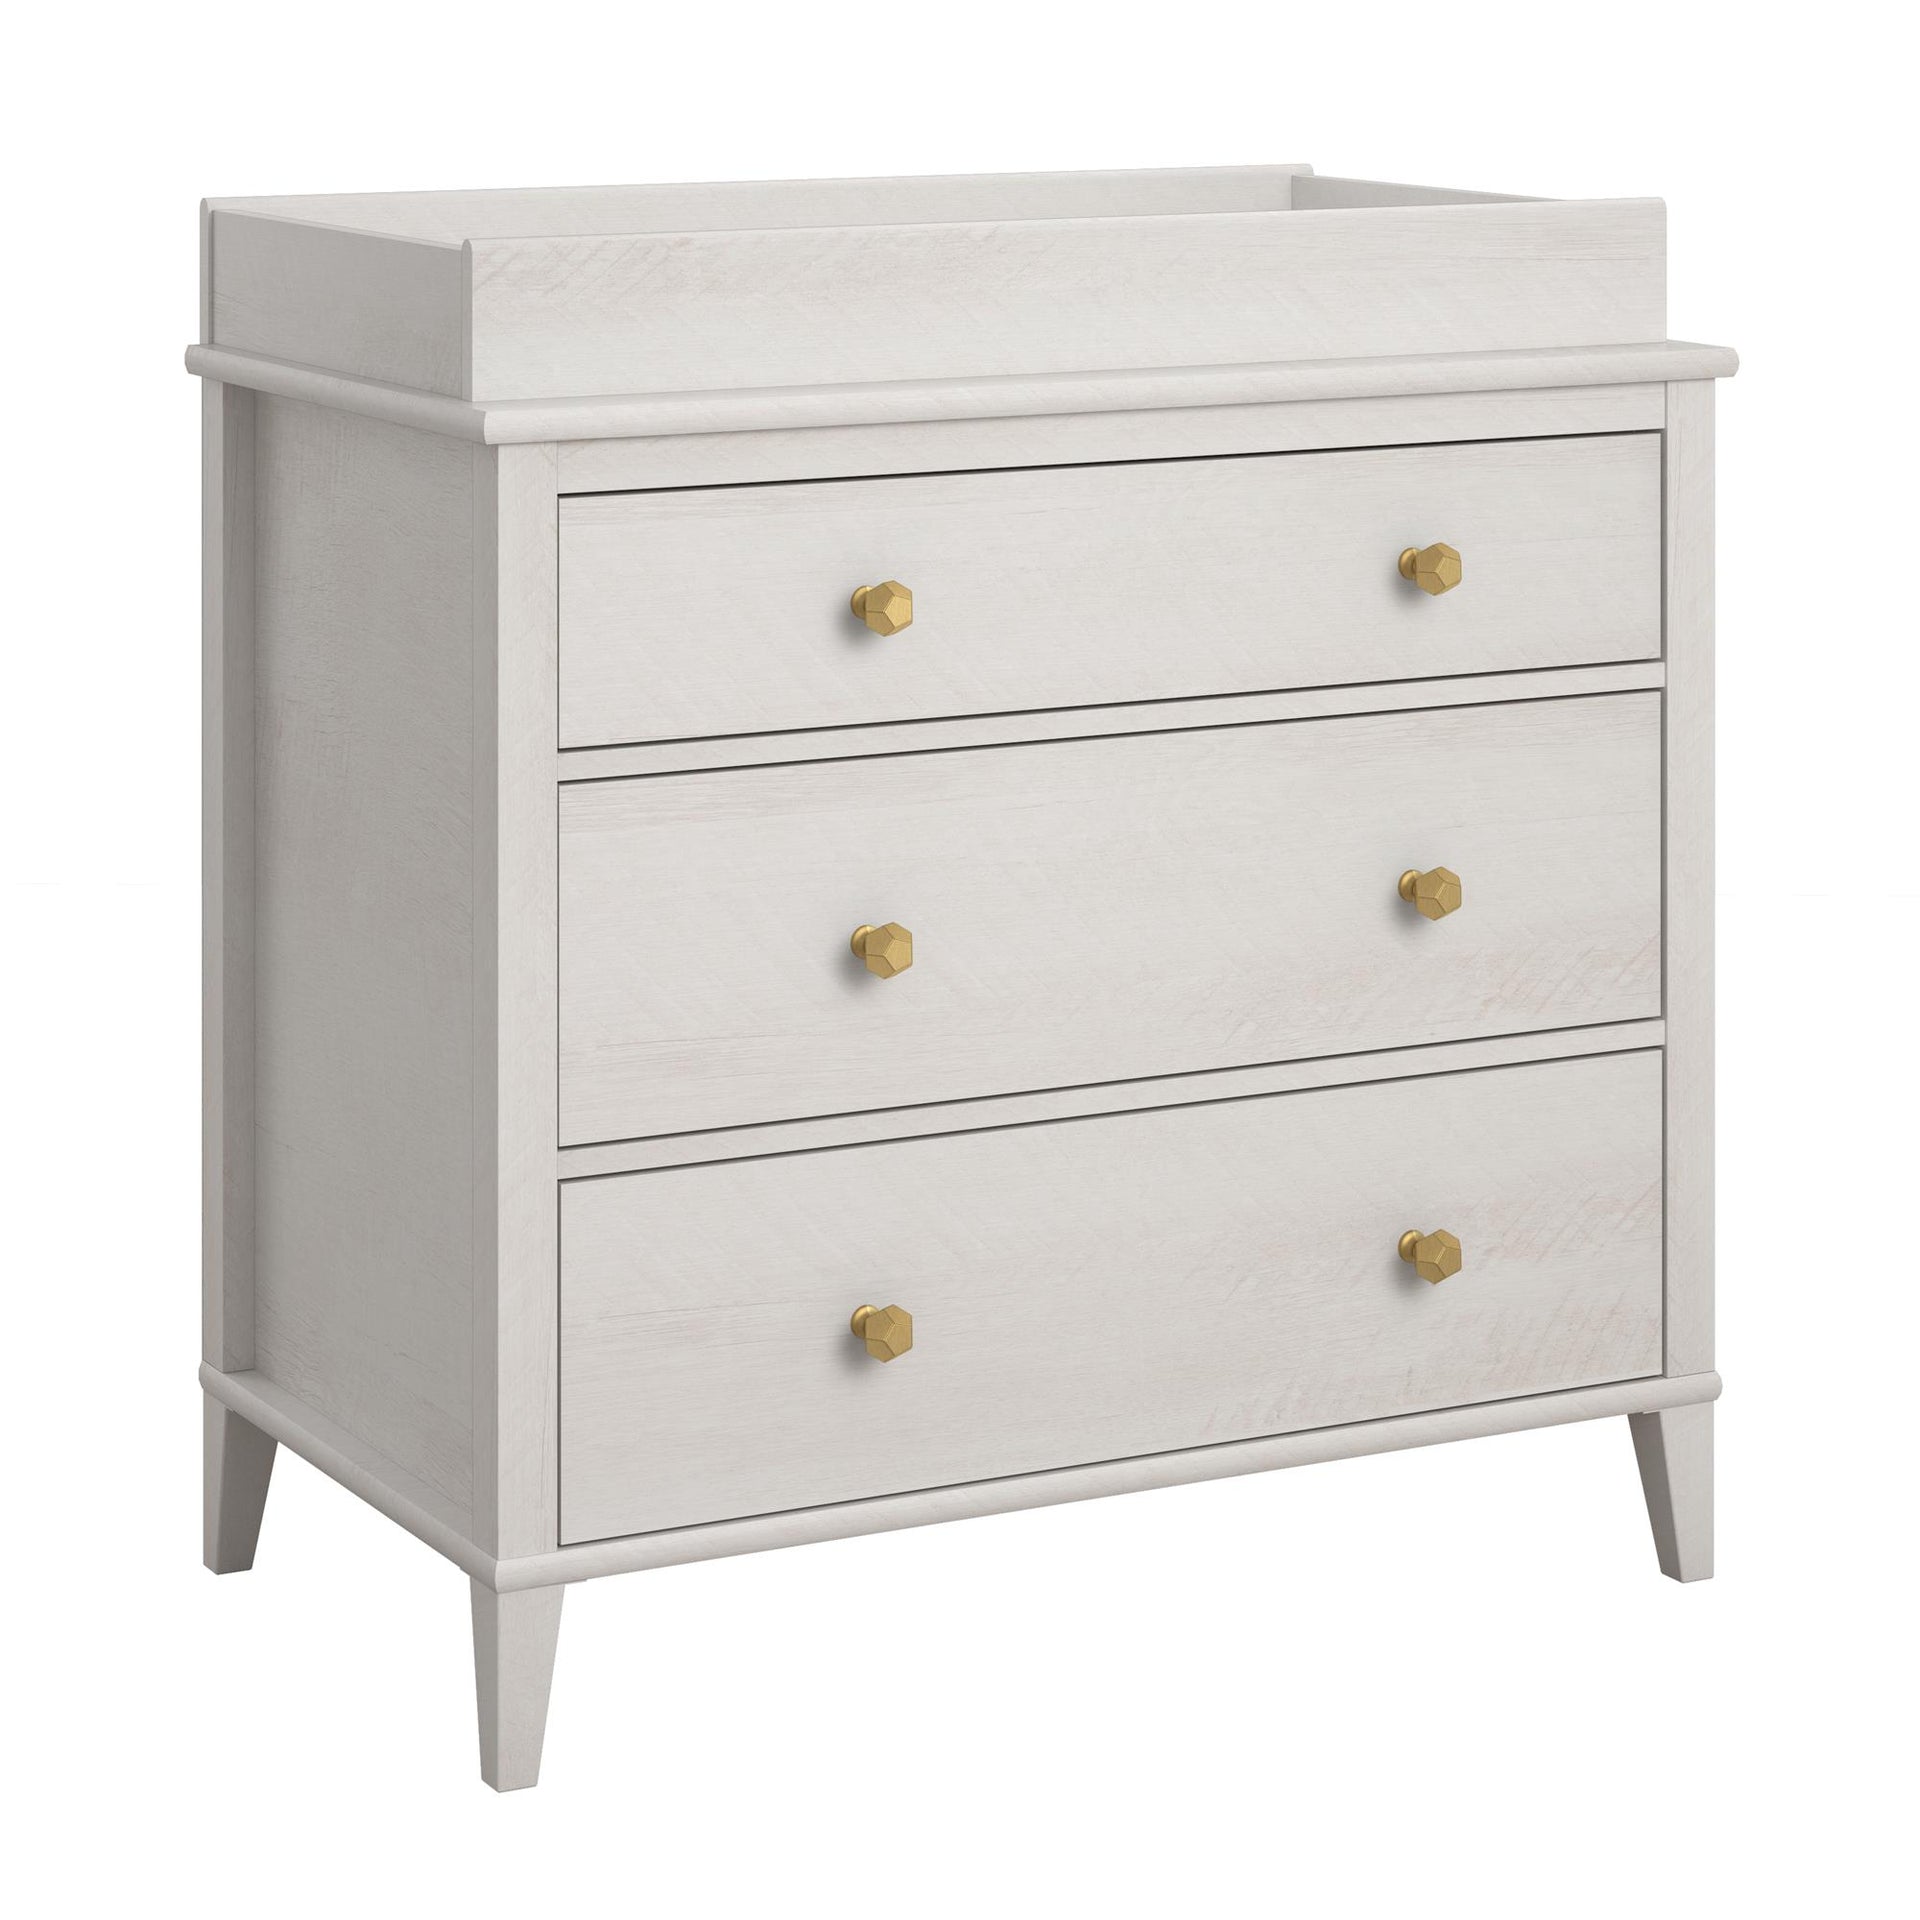 Monarch Hill Poppy 3 Drawer Changing Table - Ivory Oak